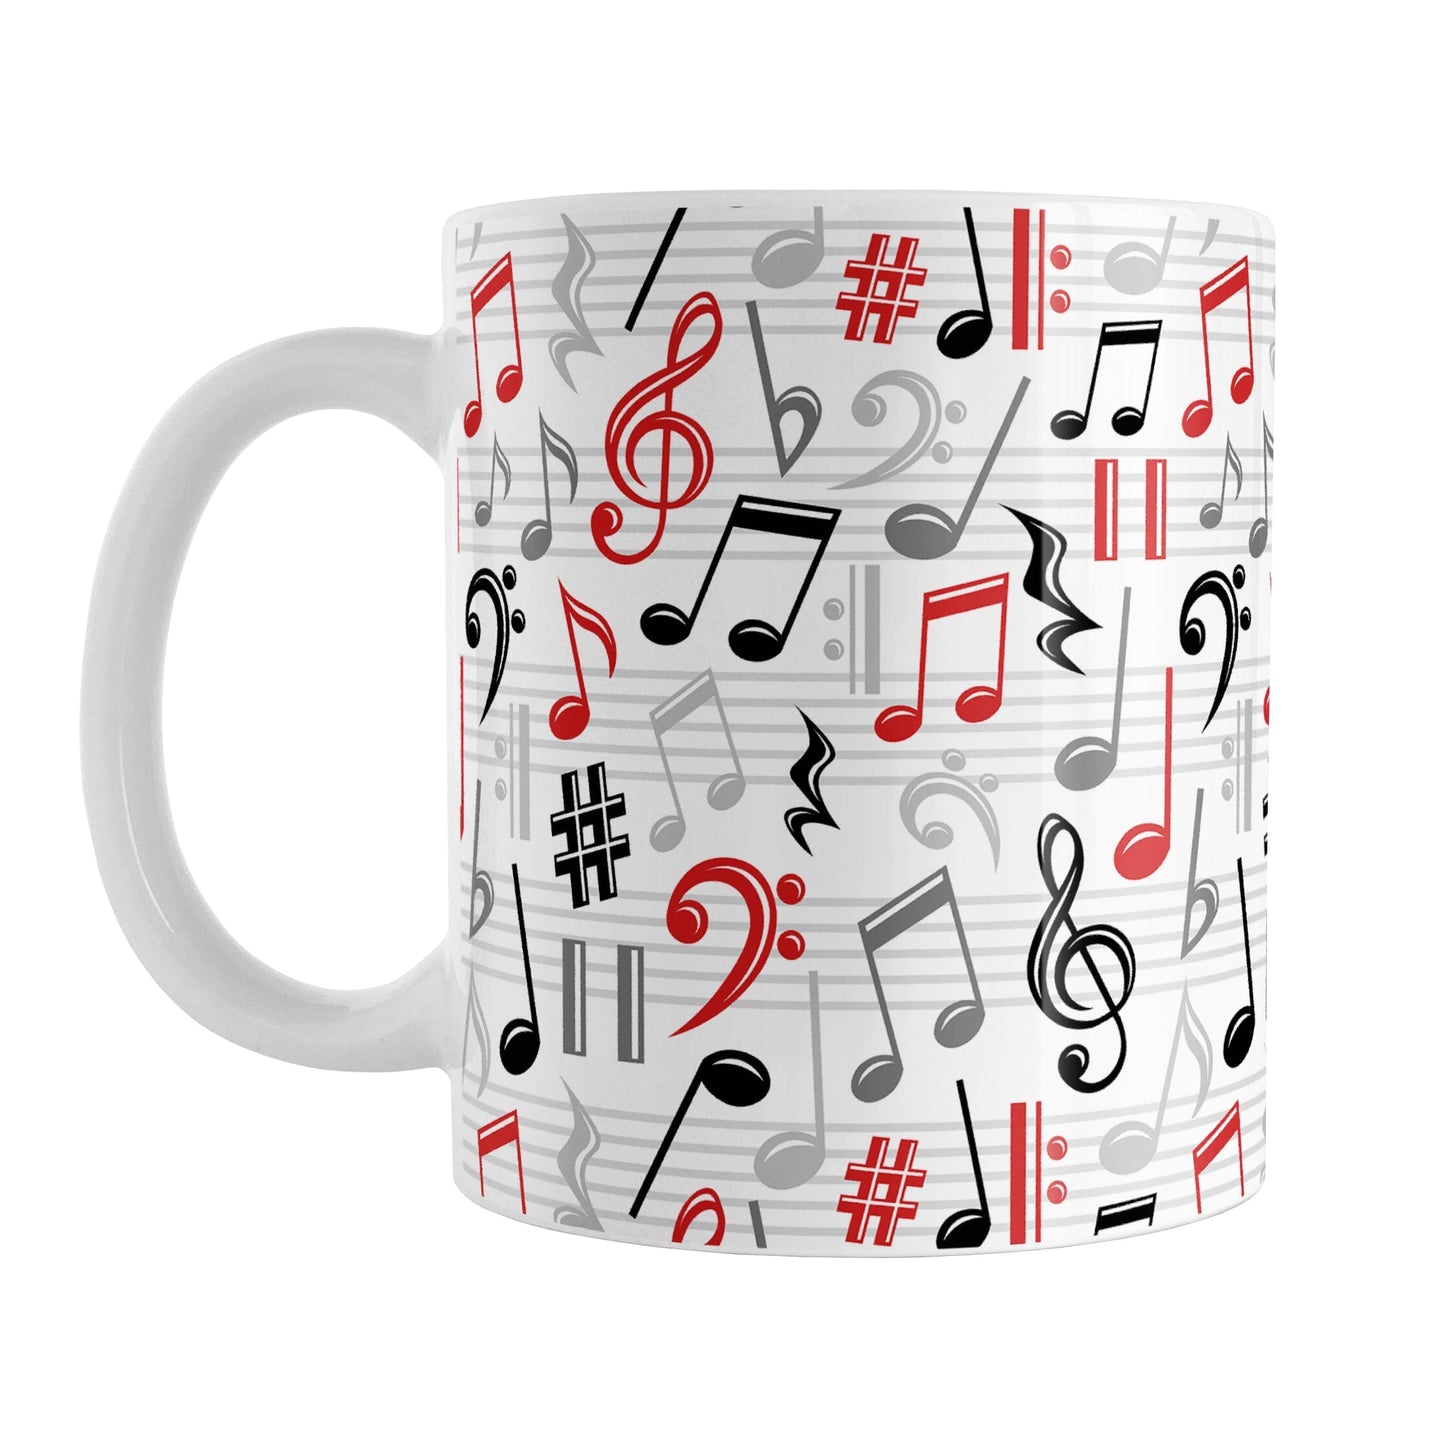 Red Music Notes Pattern Mug (11oz) at Amy's Coffee Mugs. A ceramic coffee mug designed with music notes and symbols in red, black, and gray in a pattern that wraps around the mug to the handle.